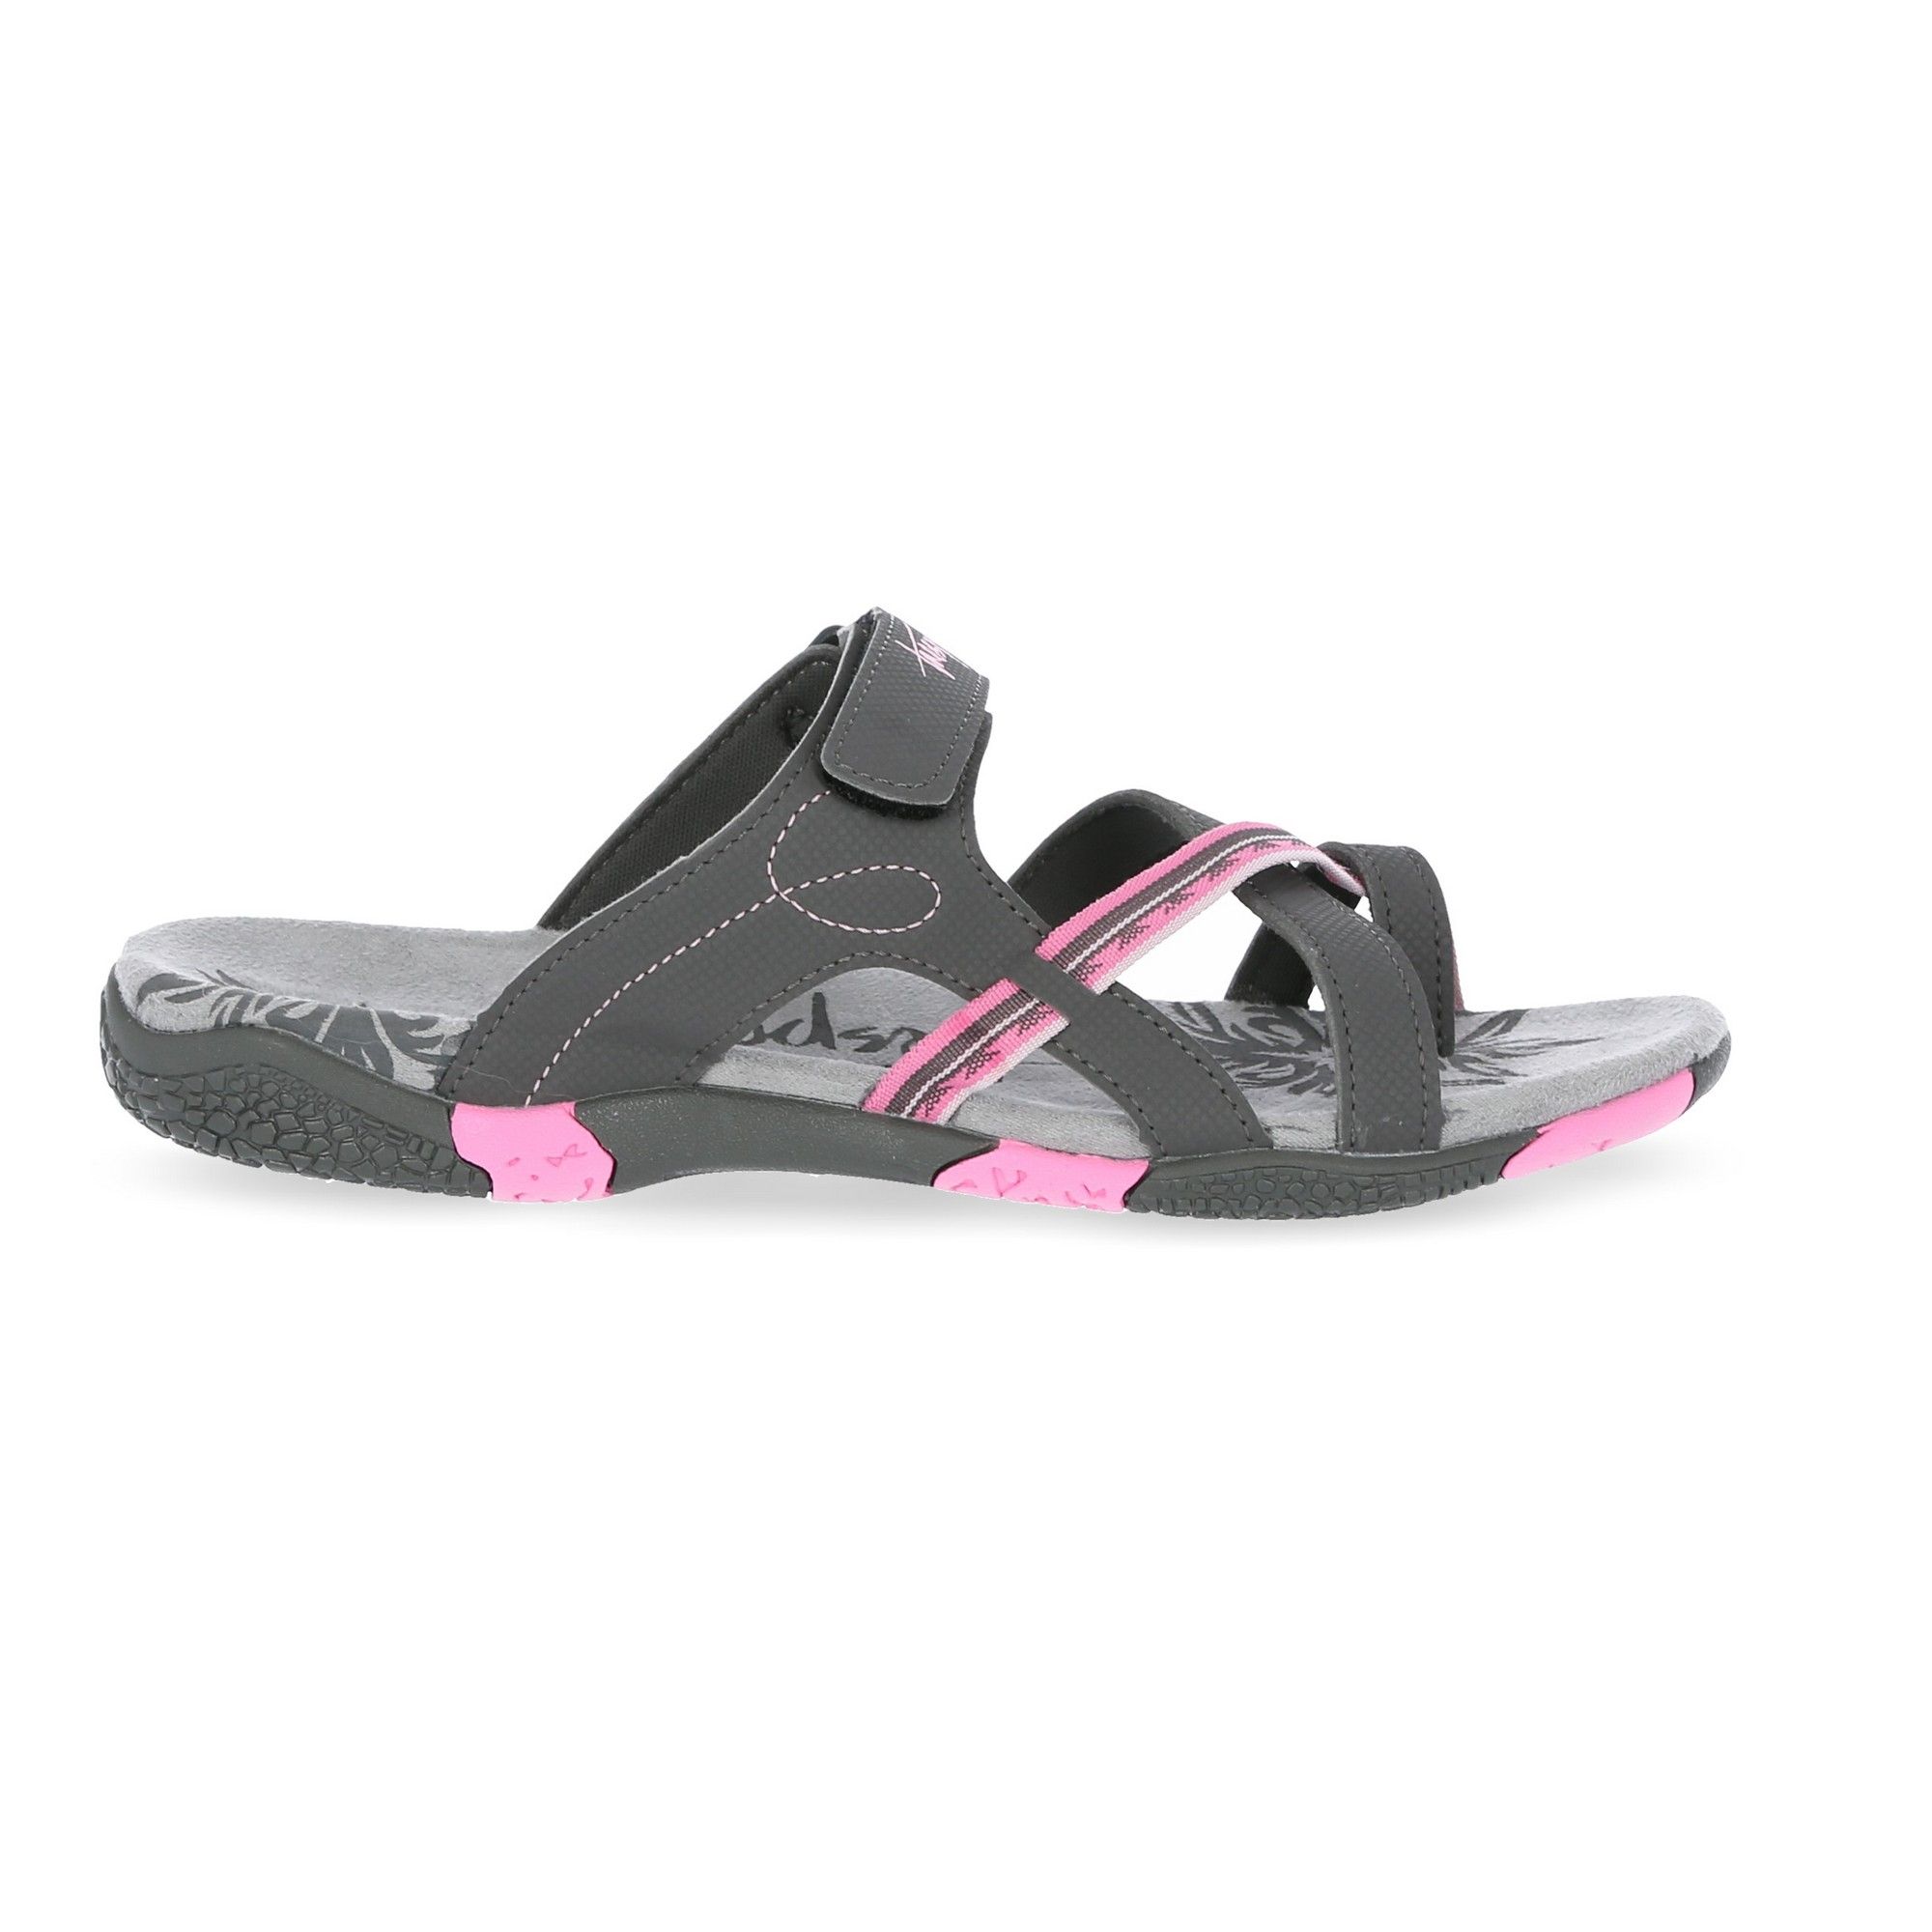 Upper: PU/Textile, Midsole: Moulded EVA, Outsole: TPR. Webbing toe post sandal. Fully lined upper with cushioning. Positive fit 1-point adjustment. Cushioned and moulded footbed. Durable traction outsole.